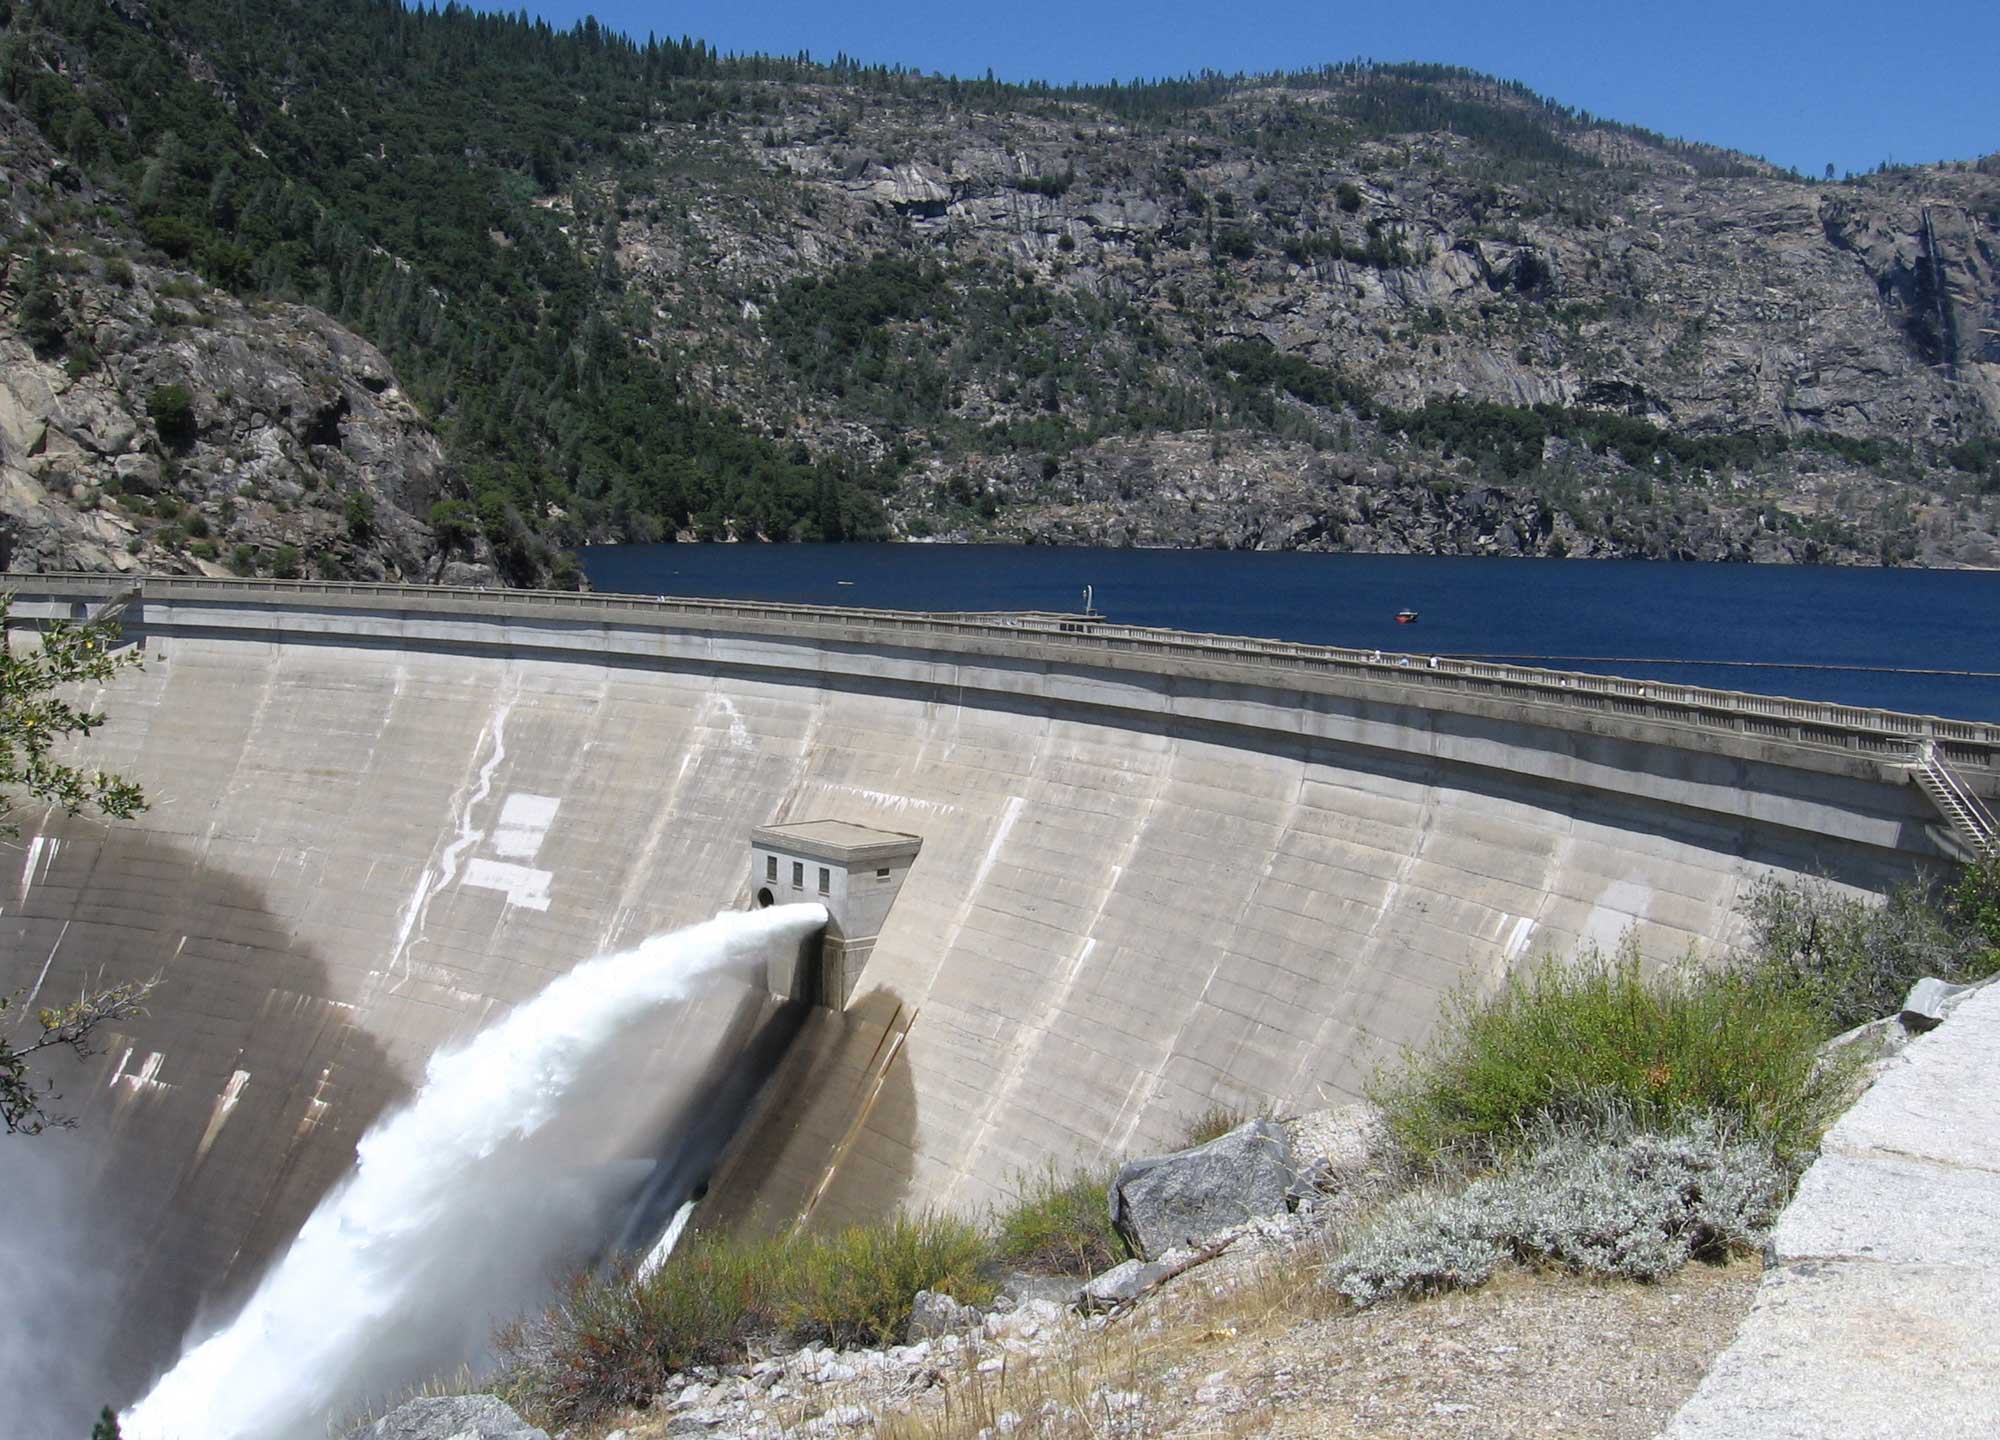 Photograph of O'Shaughnessy Dam in Hetch Hetchy Valley, Yosemite National Park, California. The photo shows a large concrete dam holding back water in a reservoir with rock slopes rising in the background. Water is shooting out of a pipe on the downriver side of the dam.